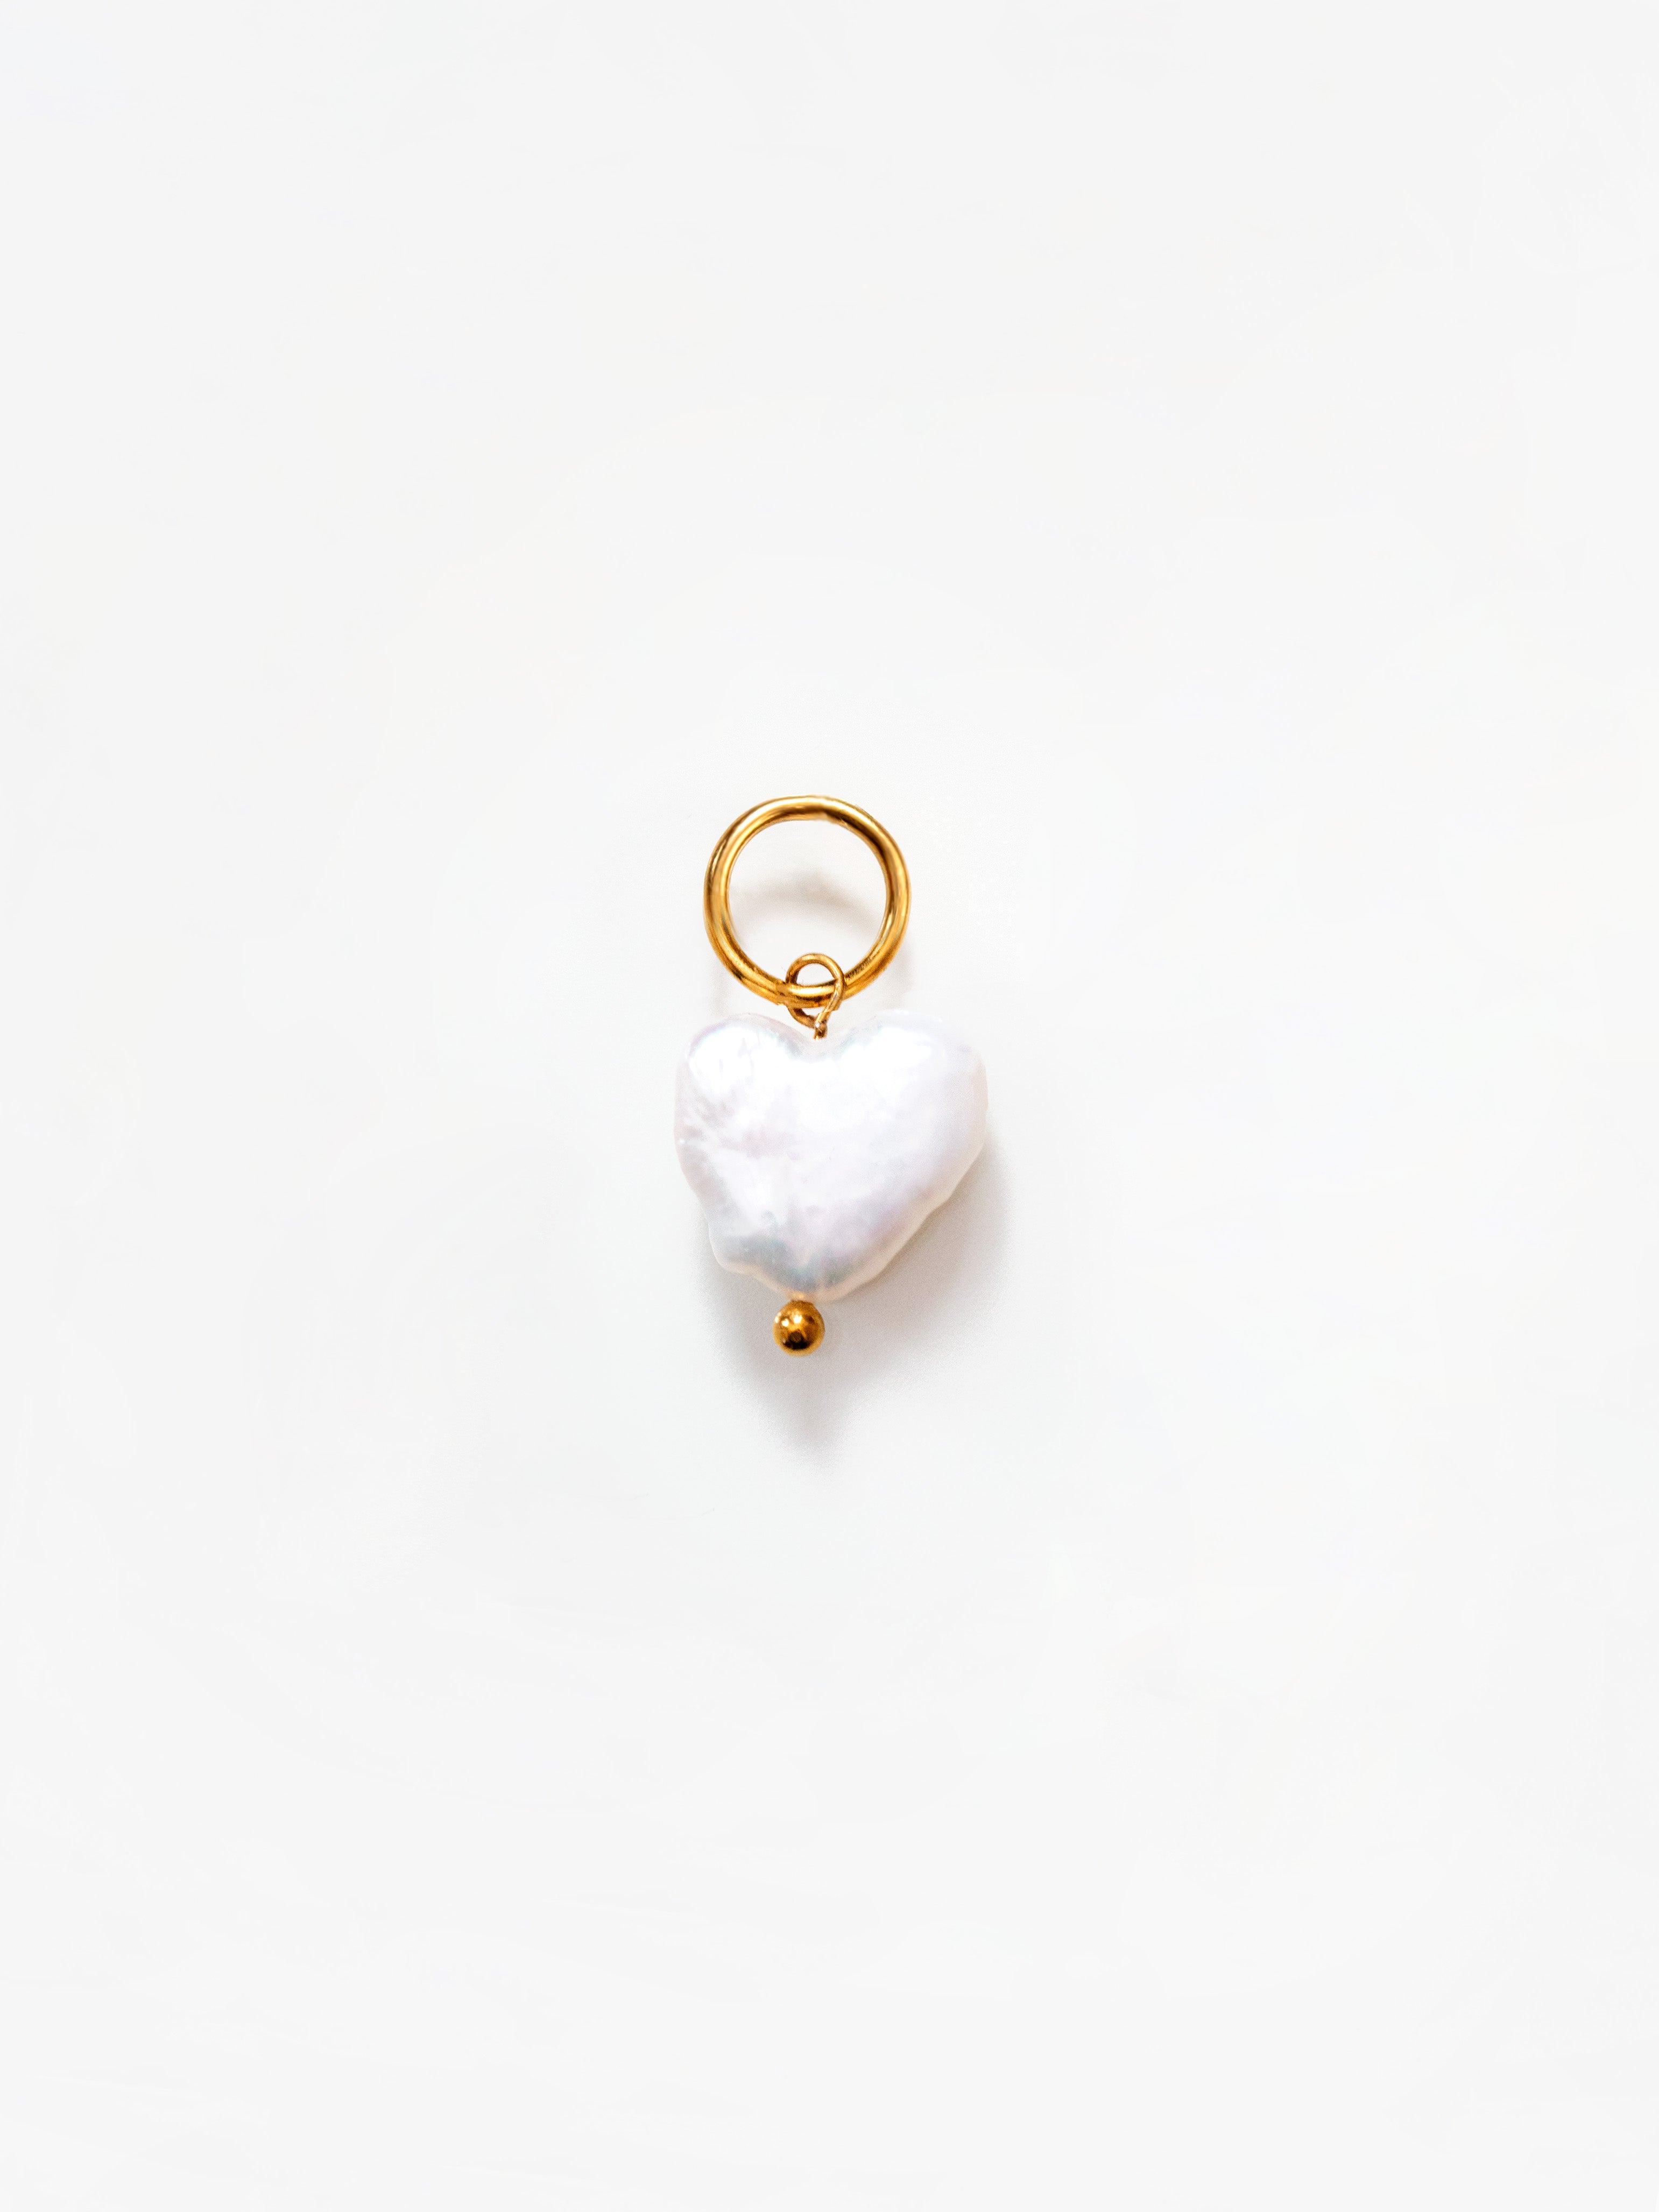 Gold Heart Shaped Pearl Pendant / Charm